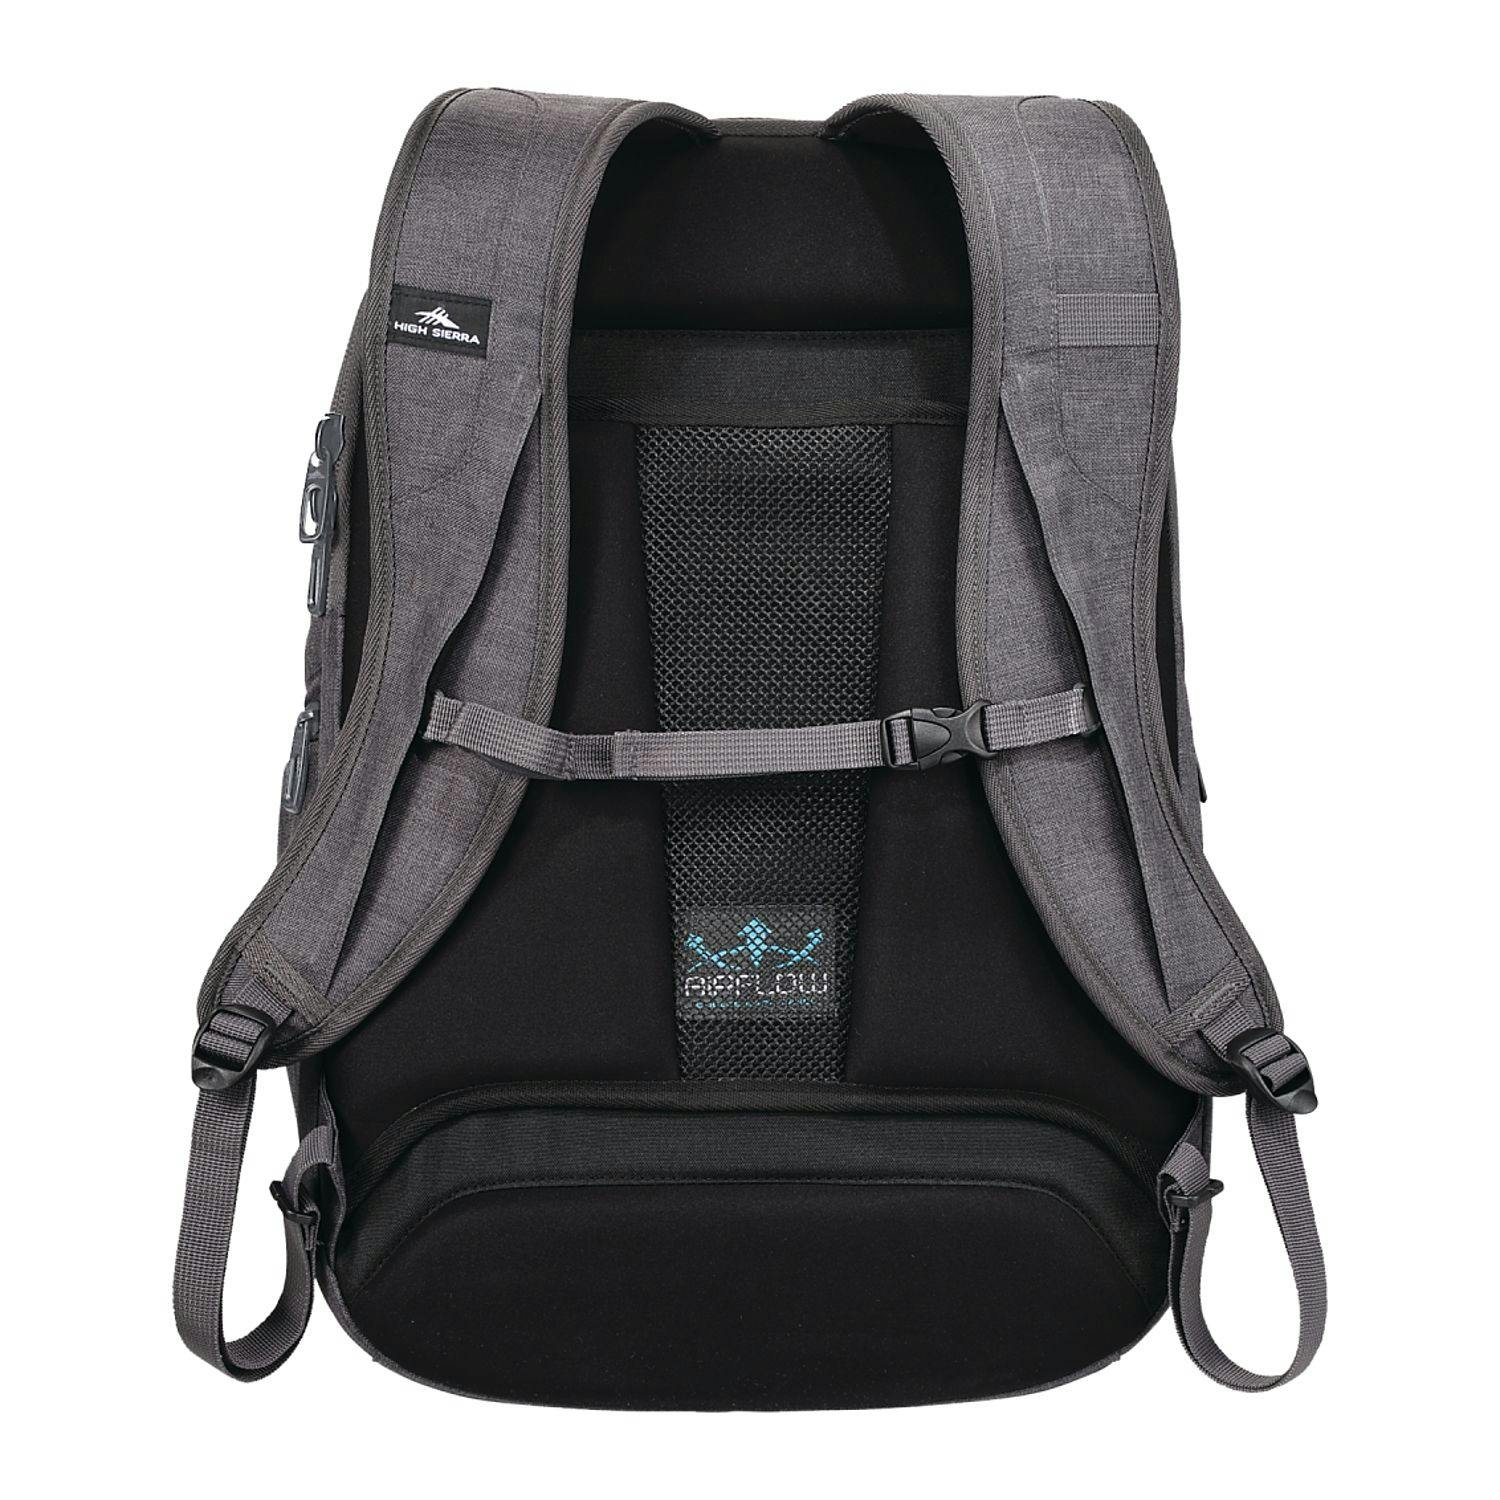 High Sierra 17" Computer UBT Deluxe Backpack - additional Image 2